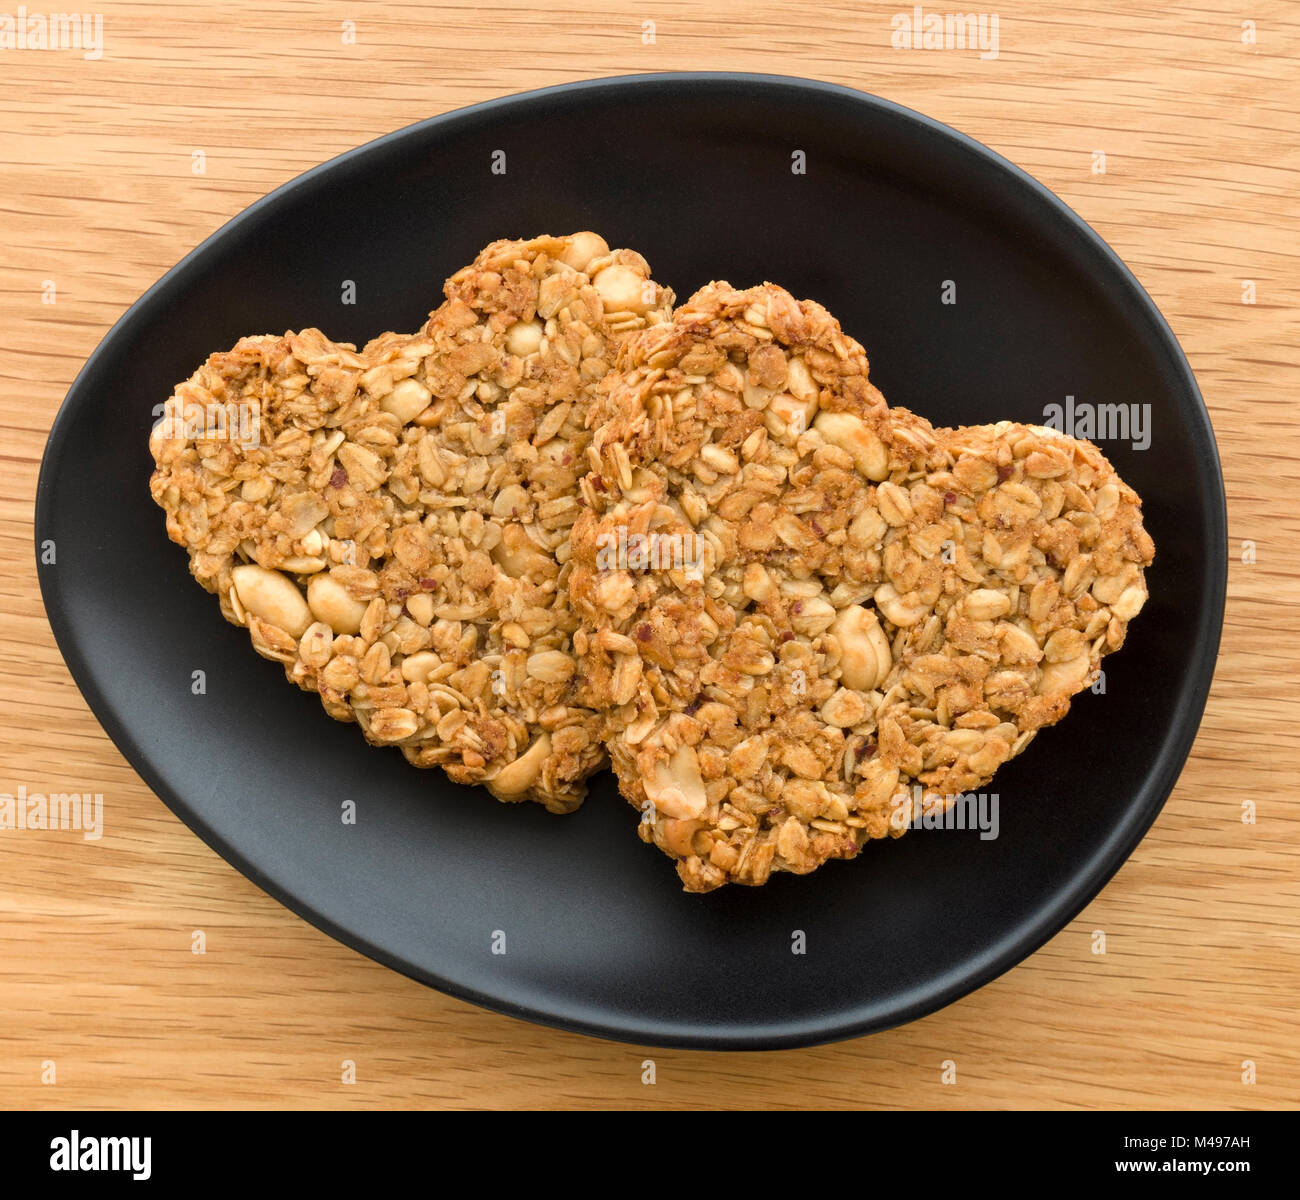 Two home-baked heart shaped peanut and oat flapjack biscuits made for Valentines day on oval black plate on wooden table. Stock Photo